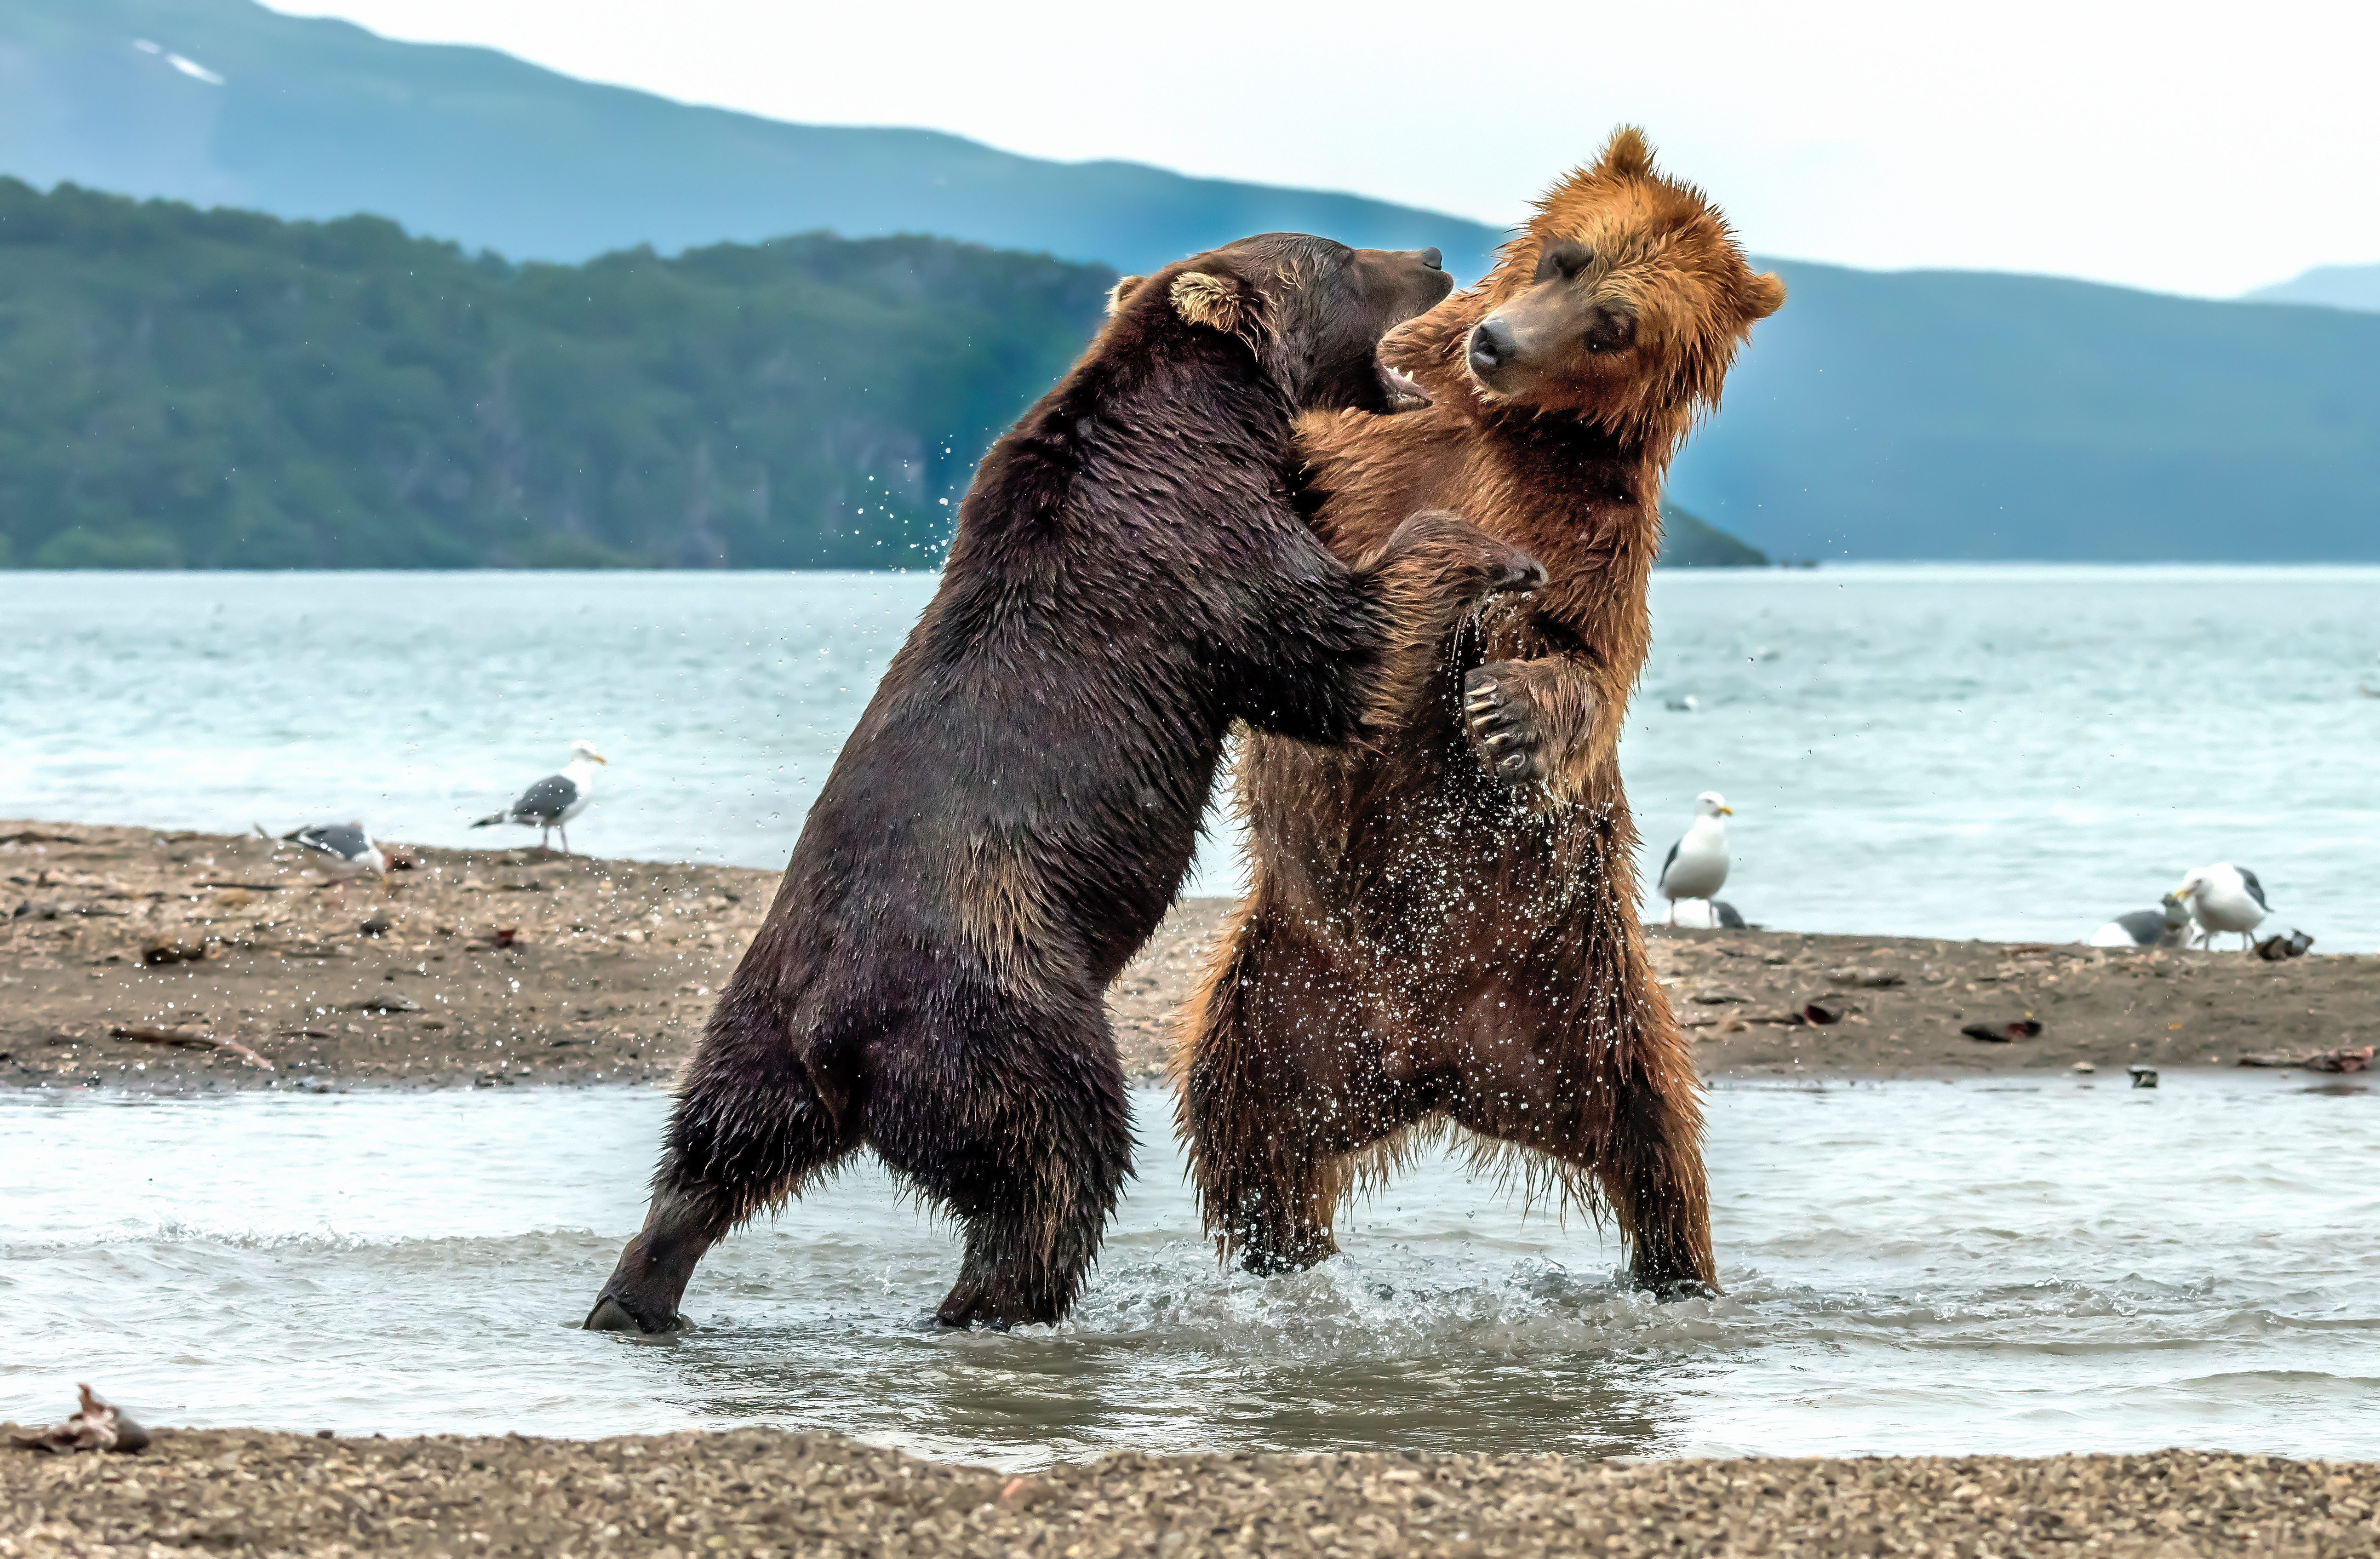 Kurile Lake, Kamchatka Peninsula, Rusia - August: two brown bears fight on the shore of the lake where dozens of bears gather to fish for salmon.